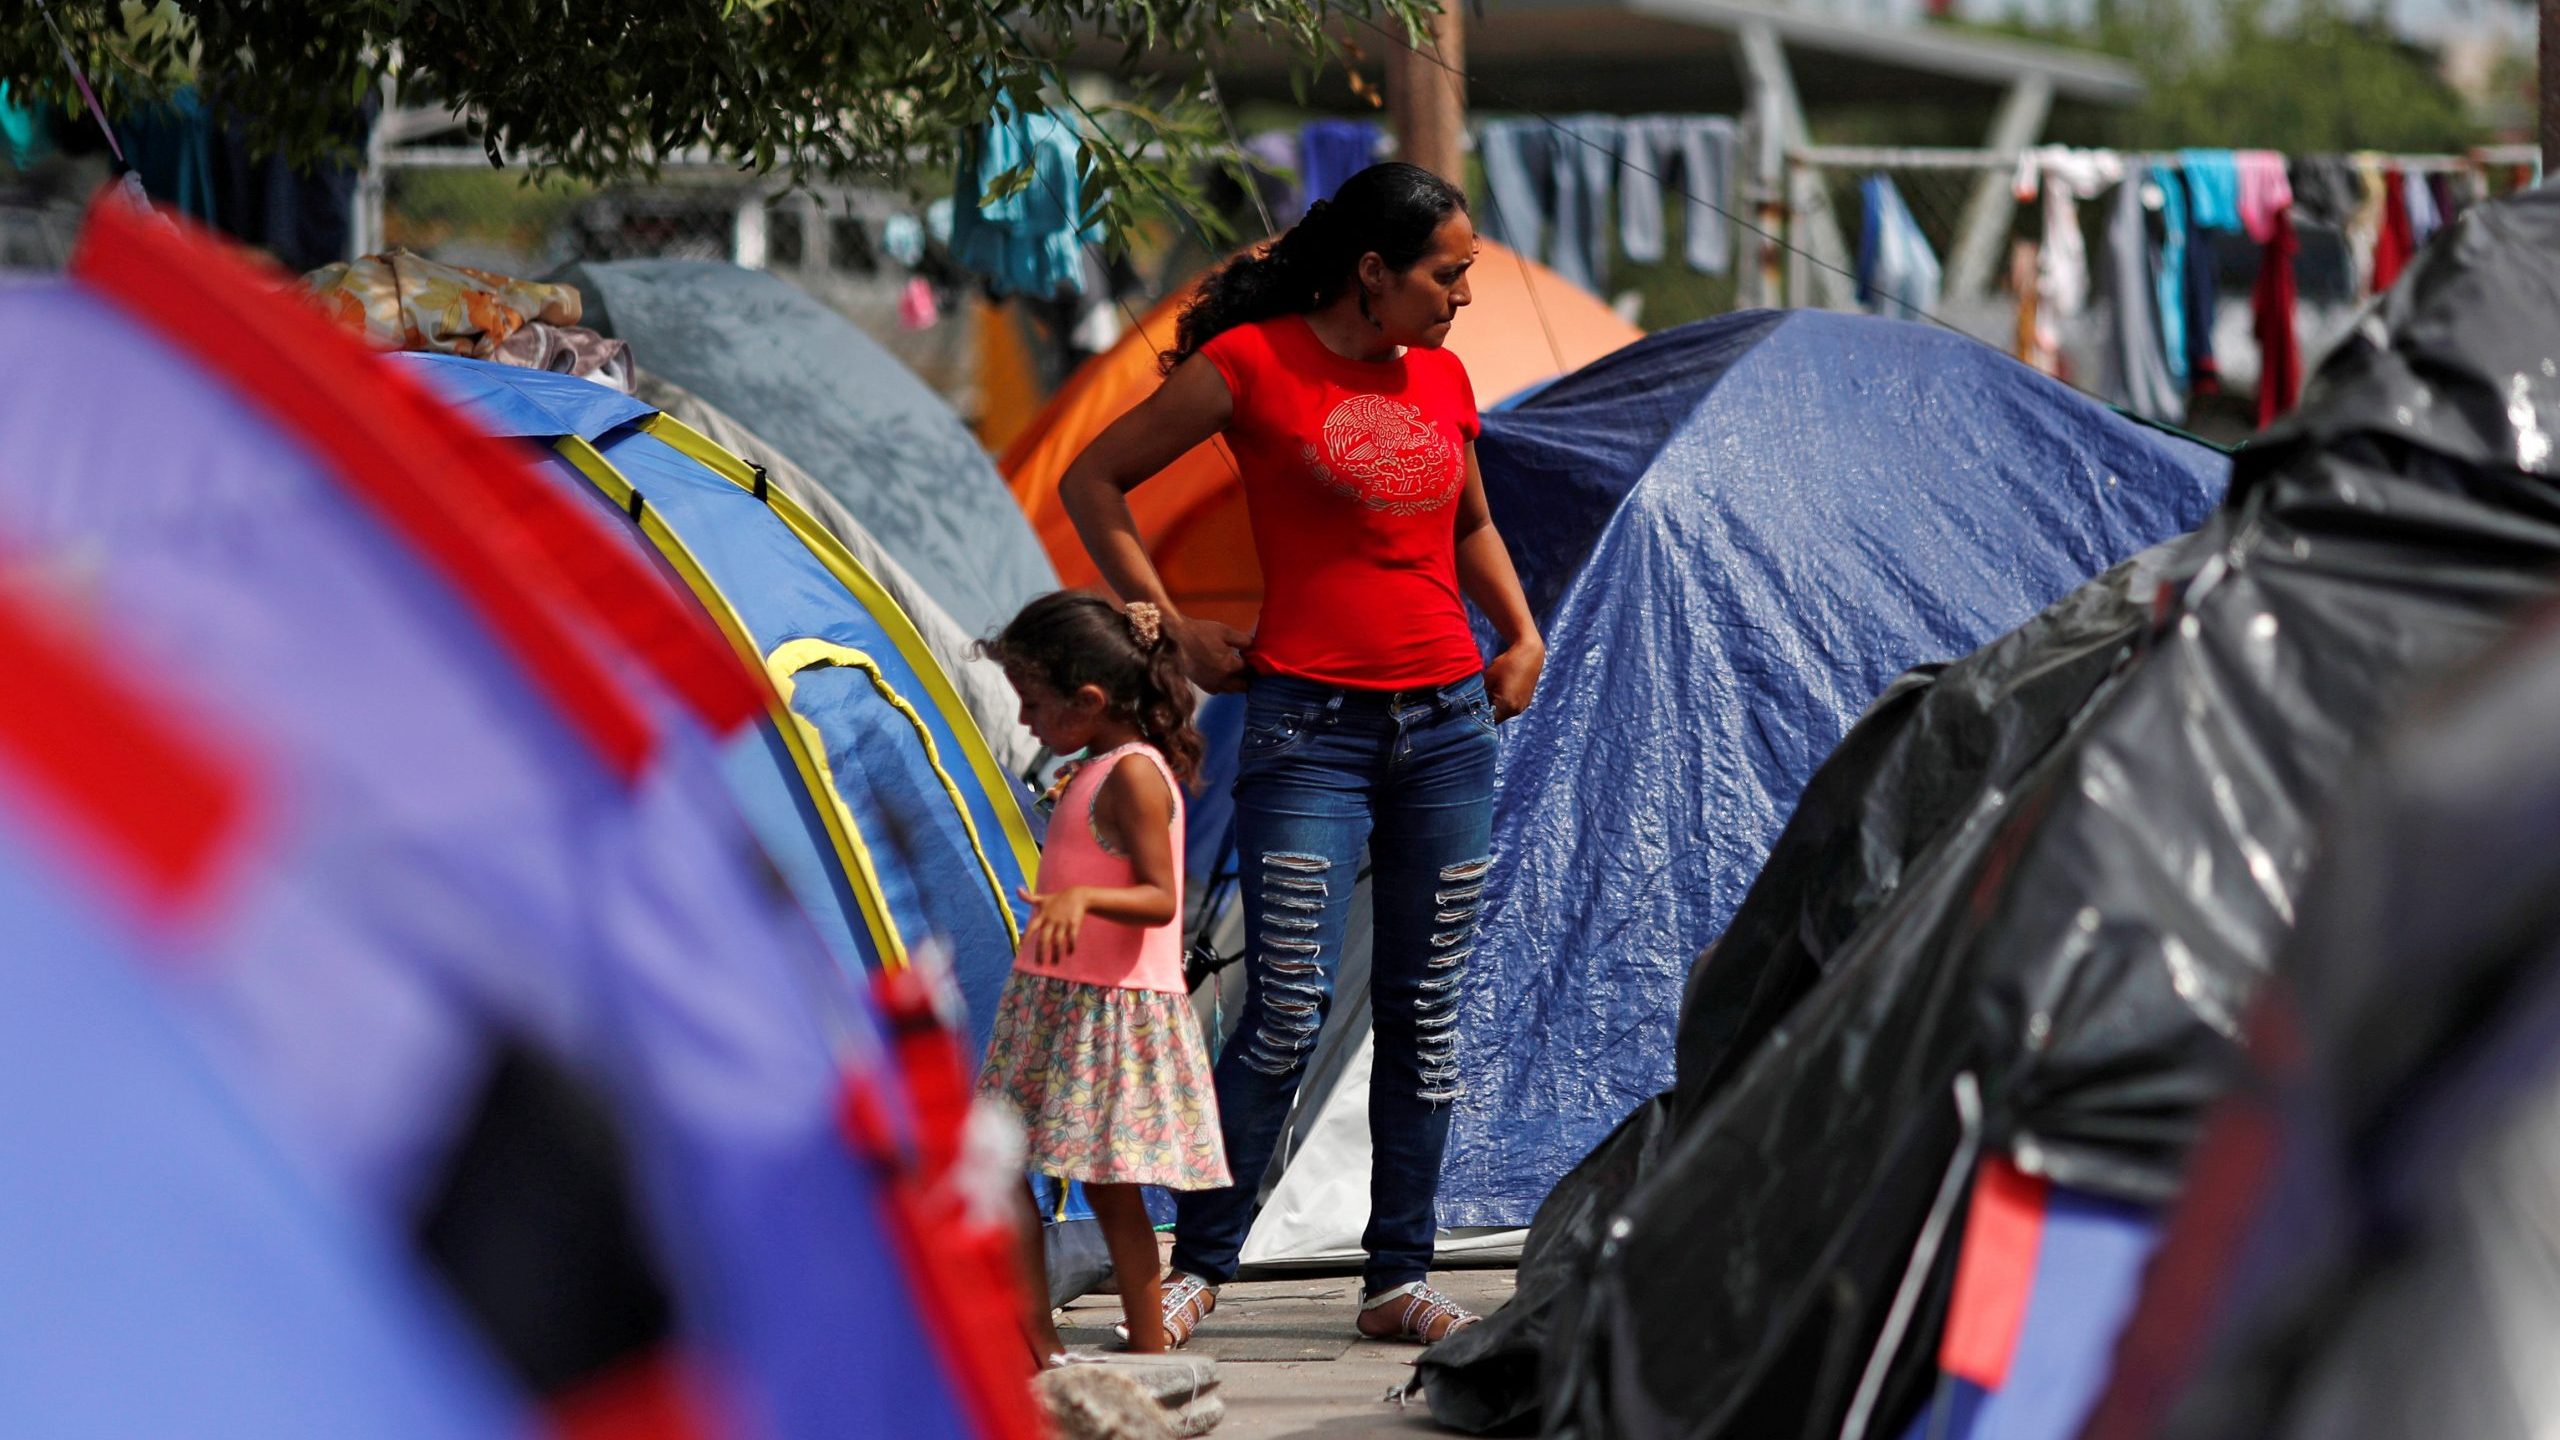 New US asylum rule is gambling with lives of migrants, Catholic leaders